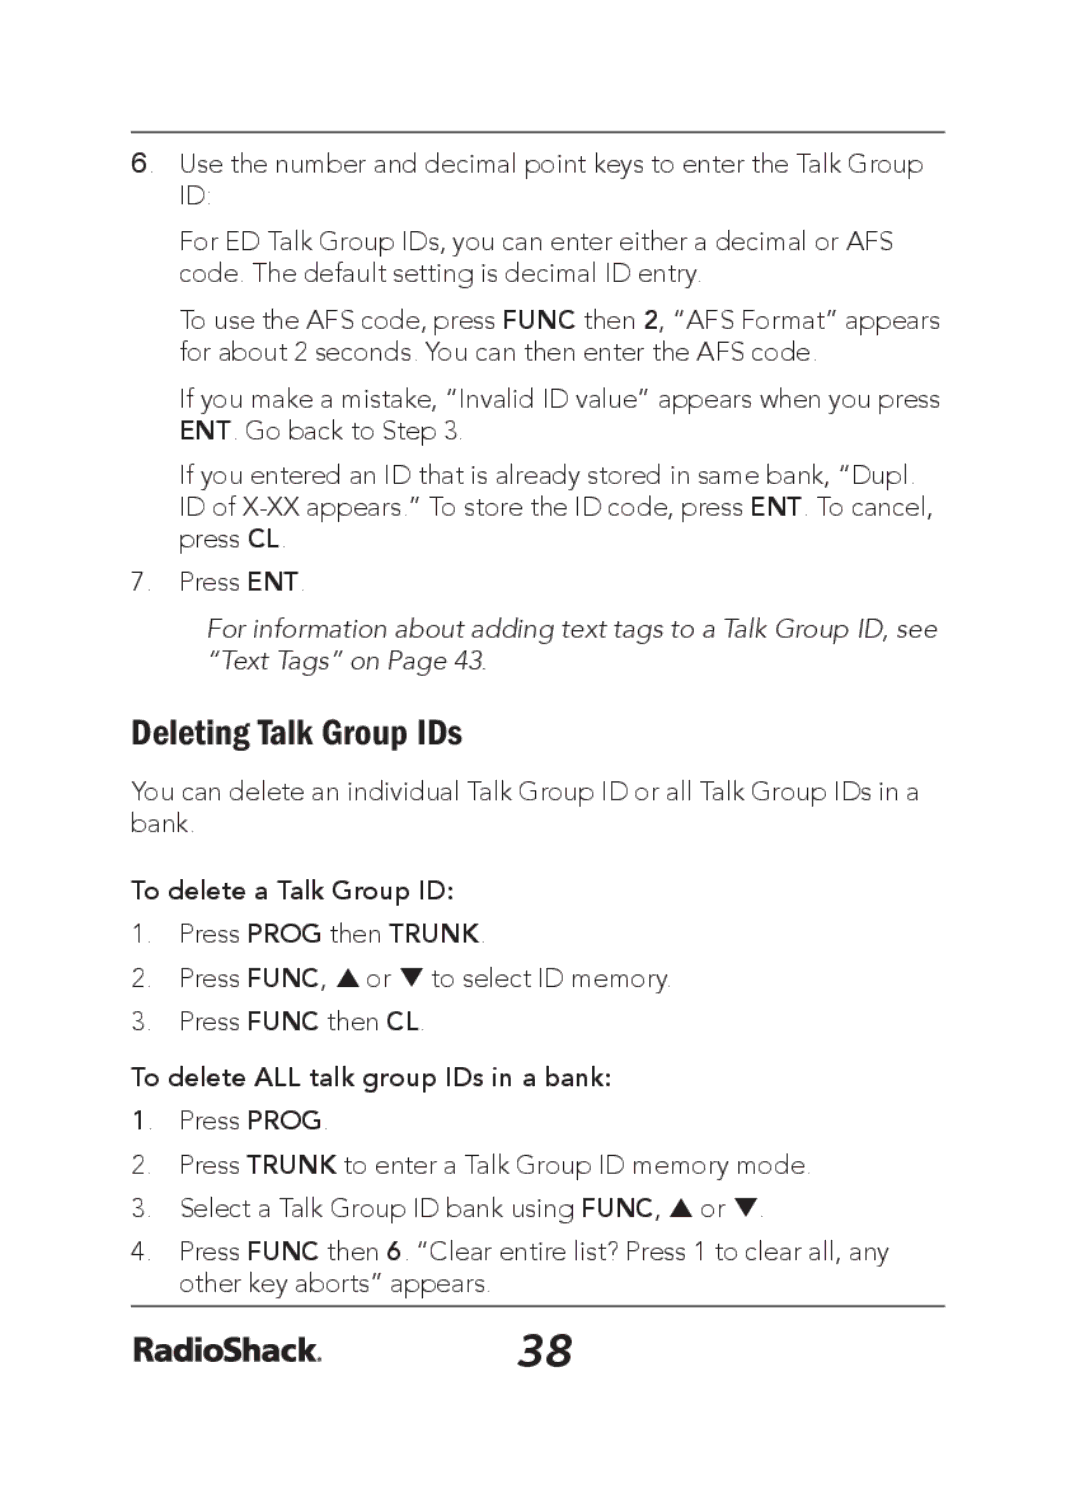 Radio Shack 20-163 manual Deleting Talk Group IDs, To delete a Talk Group ID 